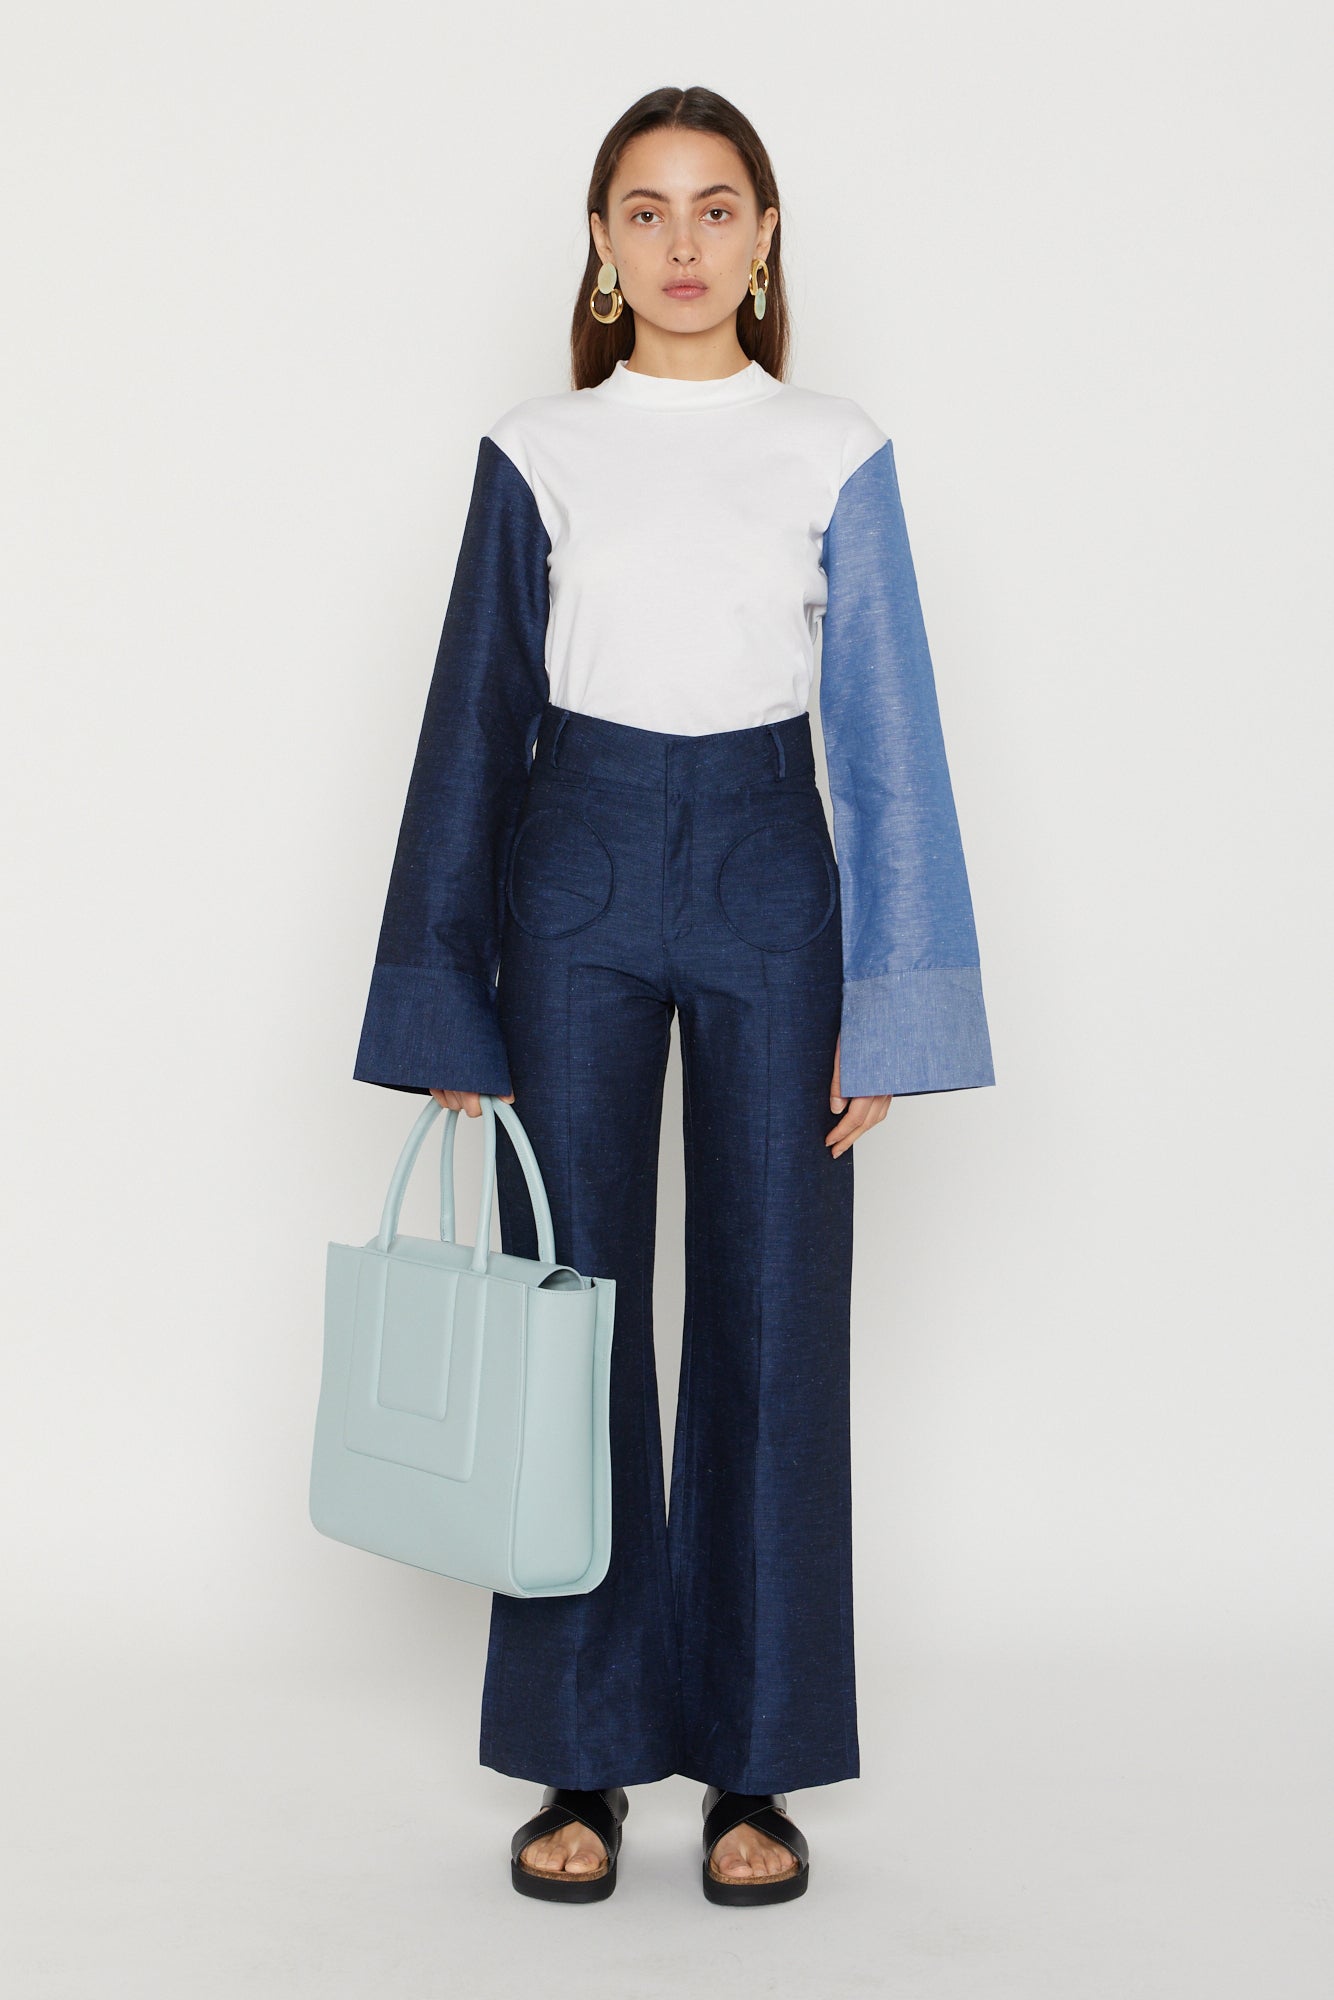 LIGHT BLUE Leather Structured Tote